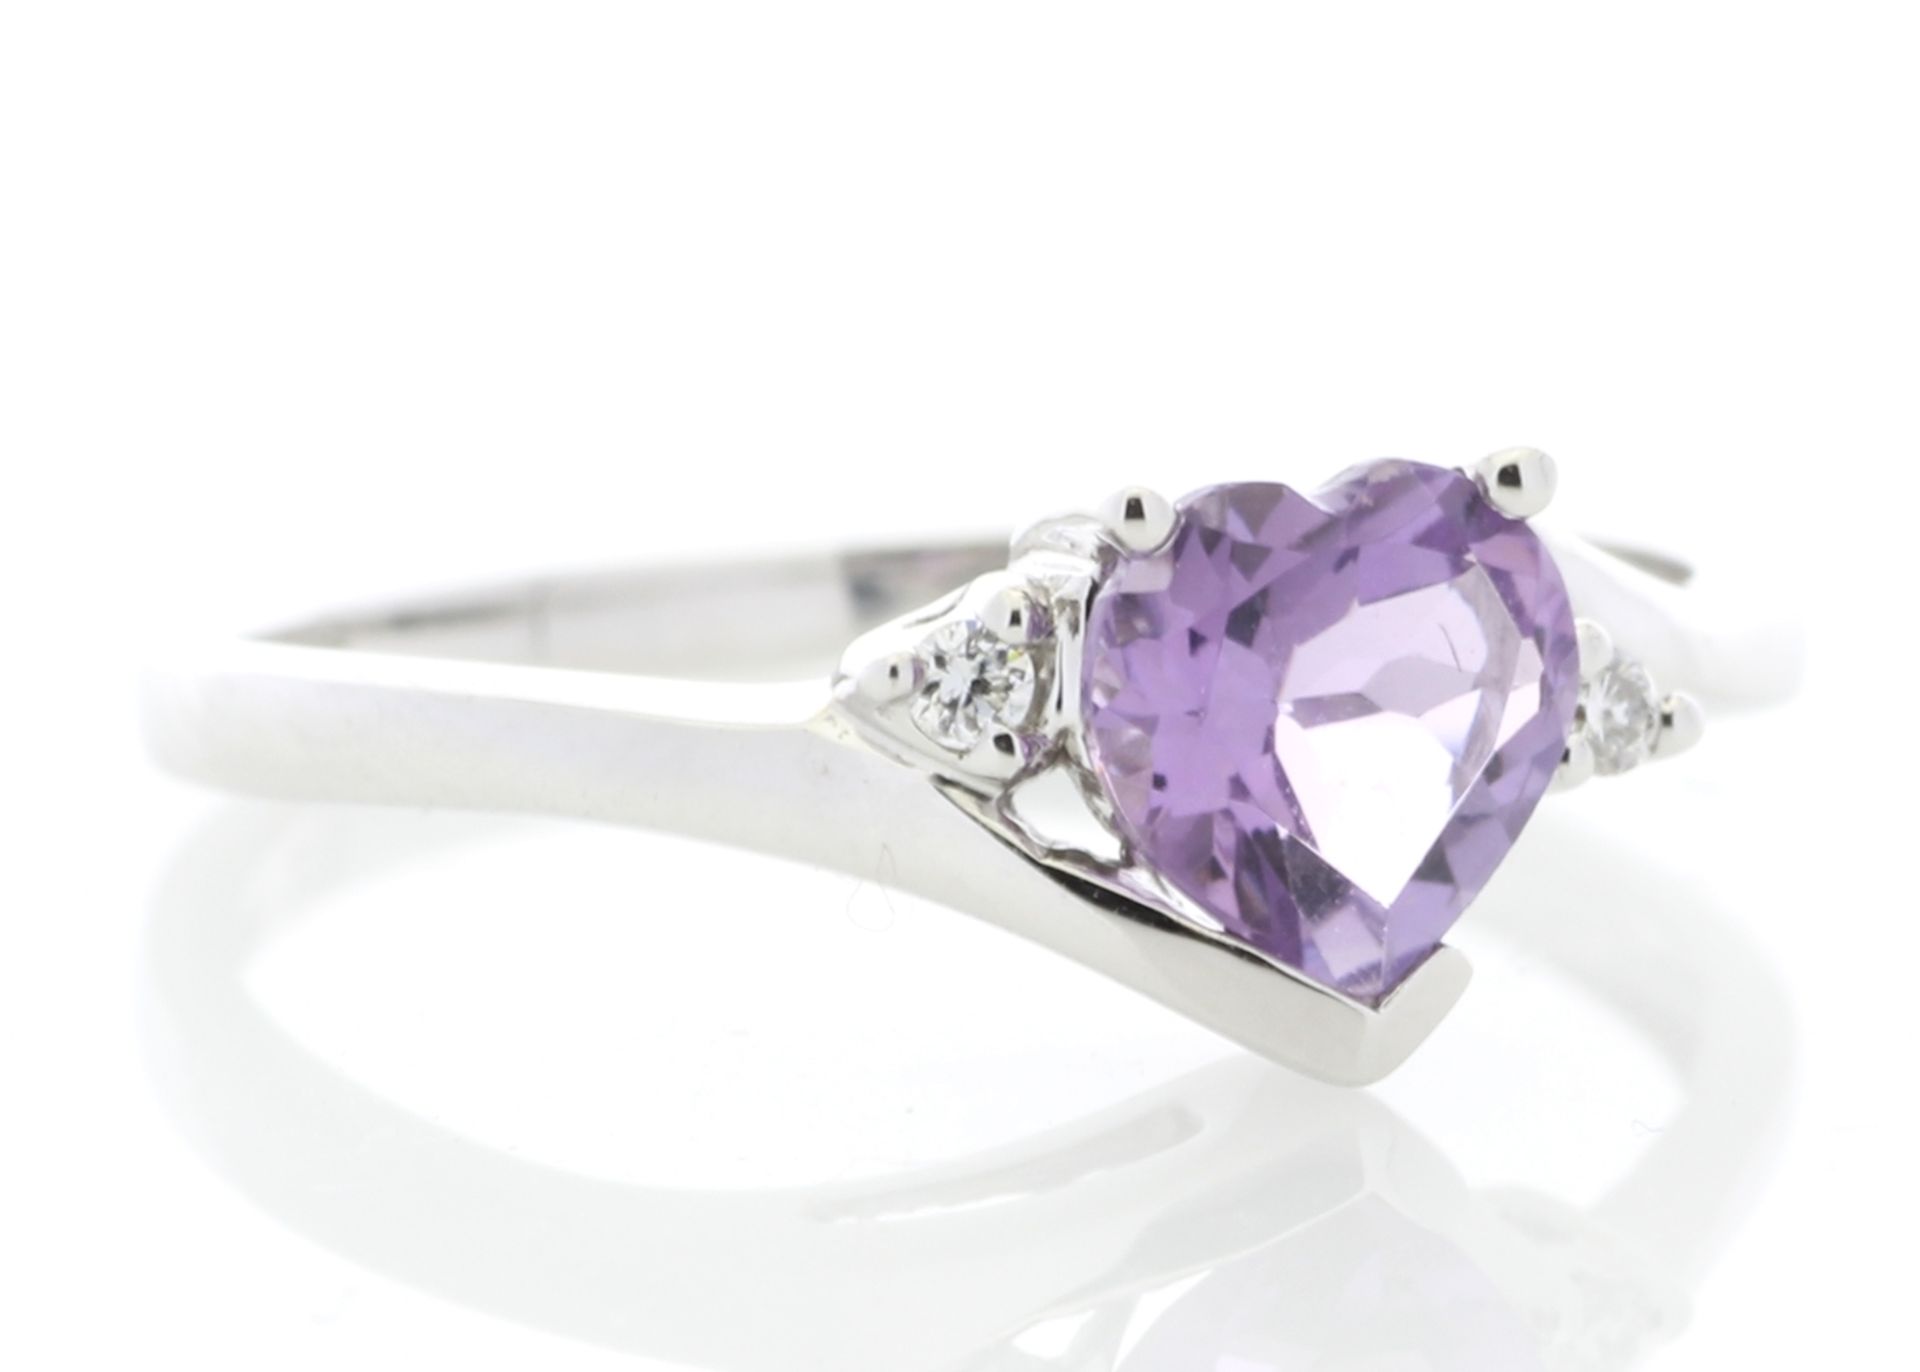 9ct White Gold Amethyst Diamond Ring (A0.68) 0.04 Carats - Image 4 of 6